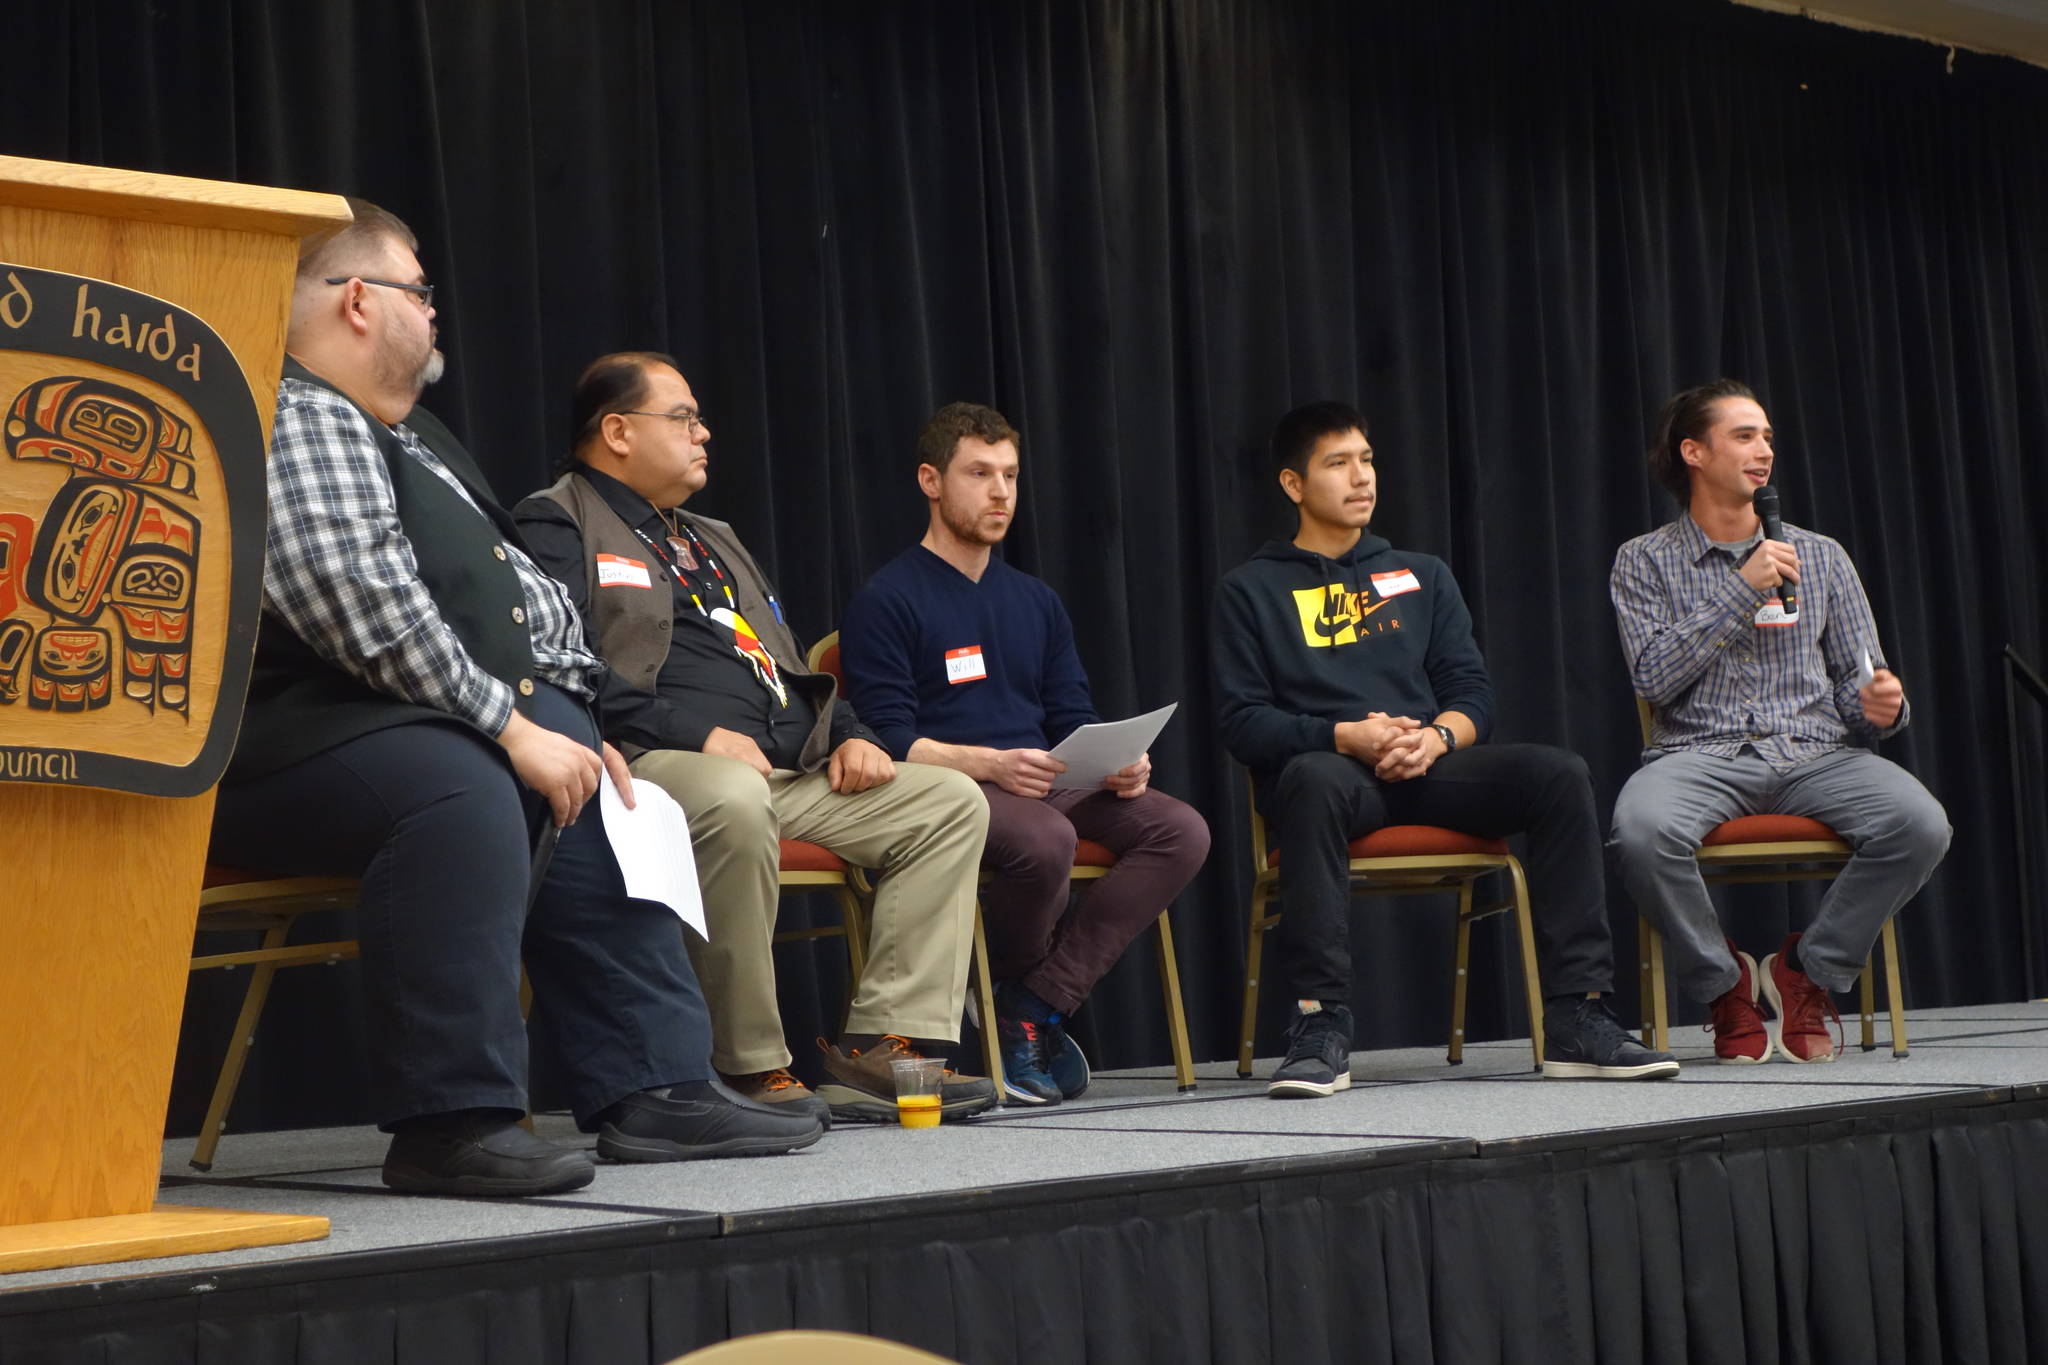 A panel of men discuss the role they can play in breaking cycles of domestic violence during a domestic violence awareness summit at Elizabeth Peratrovich Hall, Friday, Oct. 25, 2019. (Ben Hohenstatt | Juneau Empire)